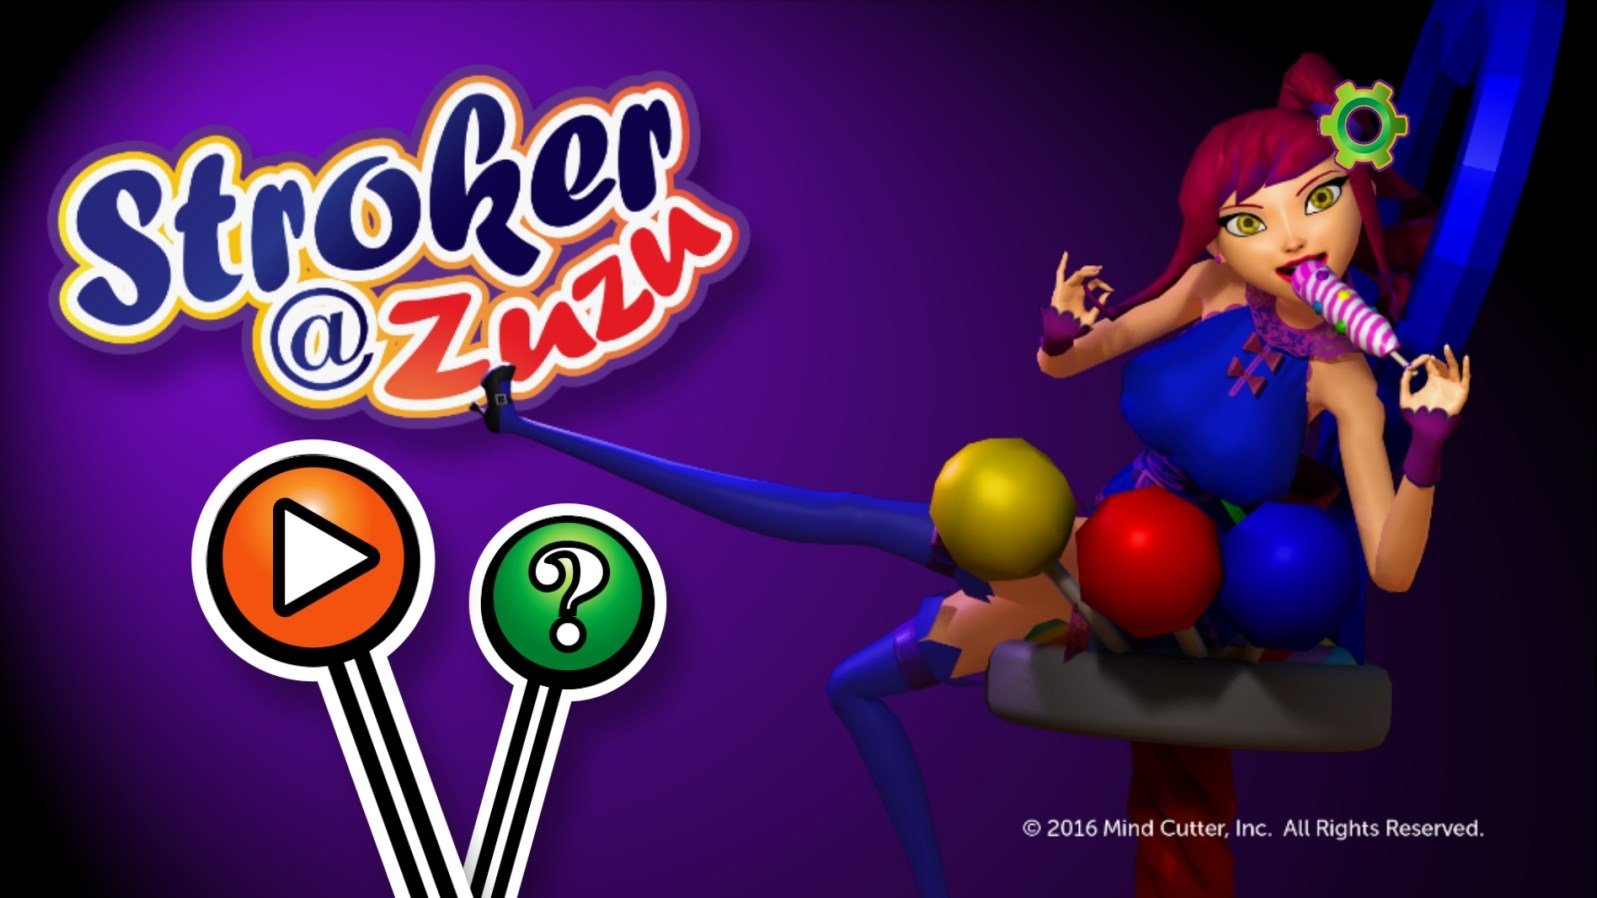 Stroker Zuzu 1 0 Download For Android Apk Free